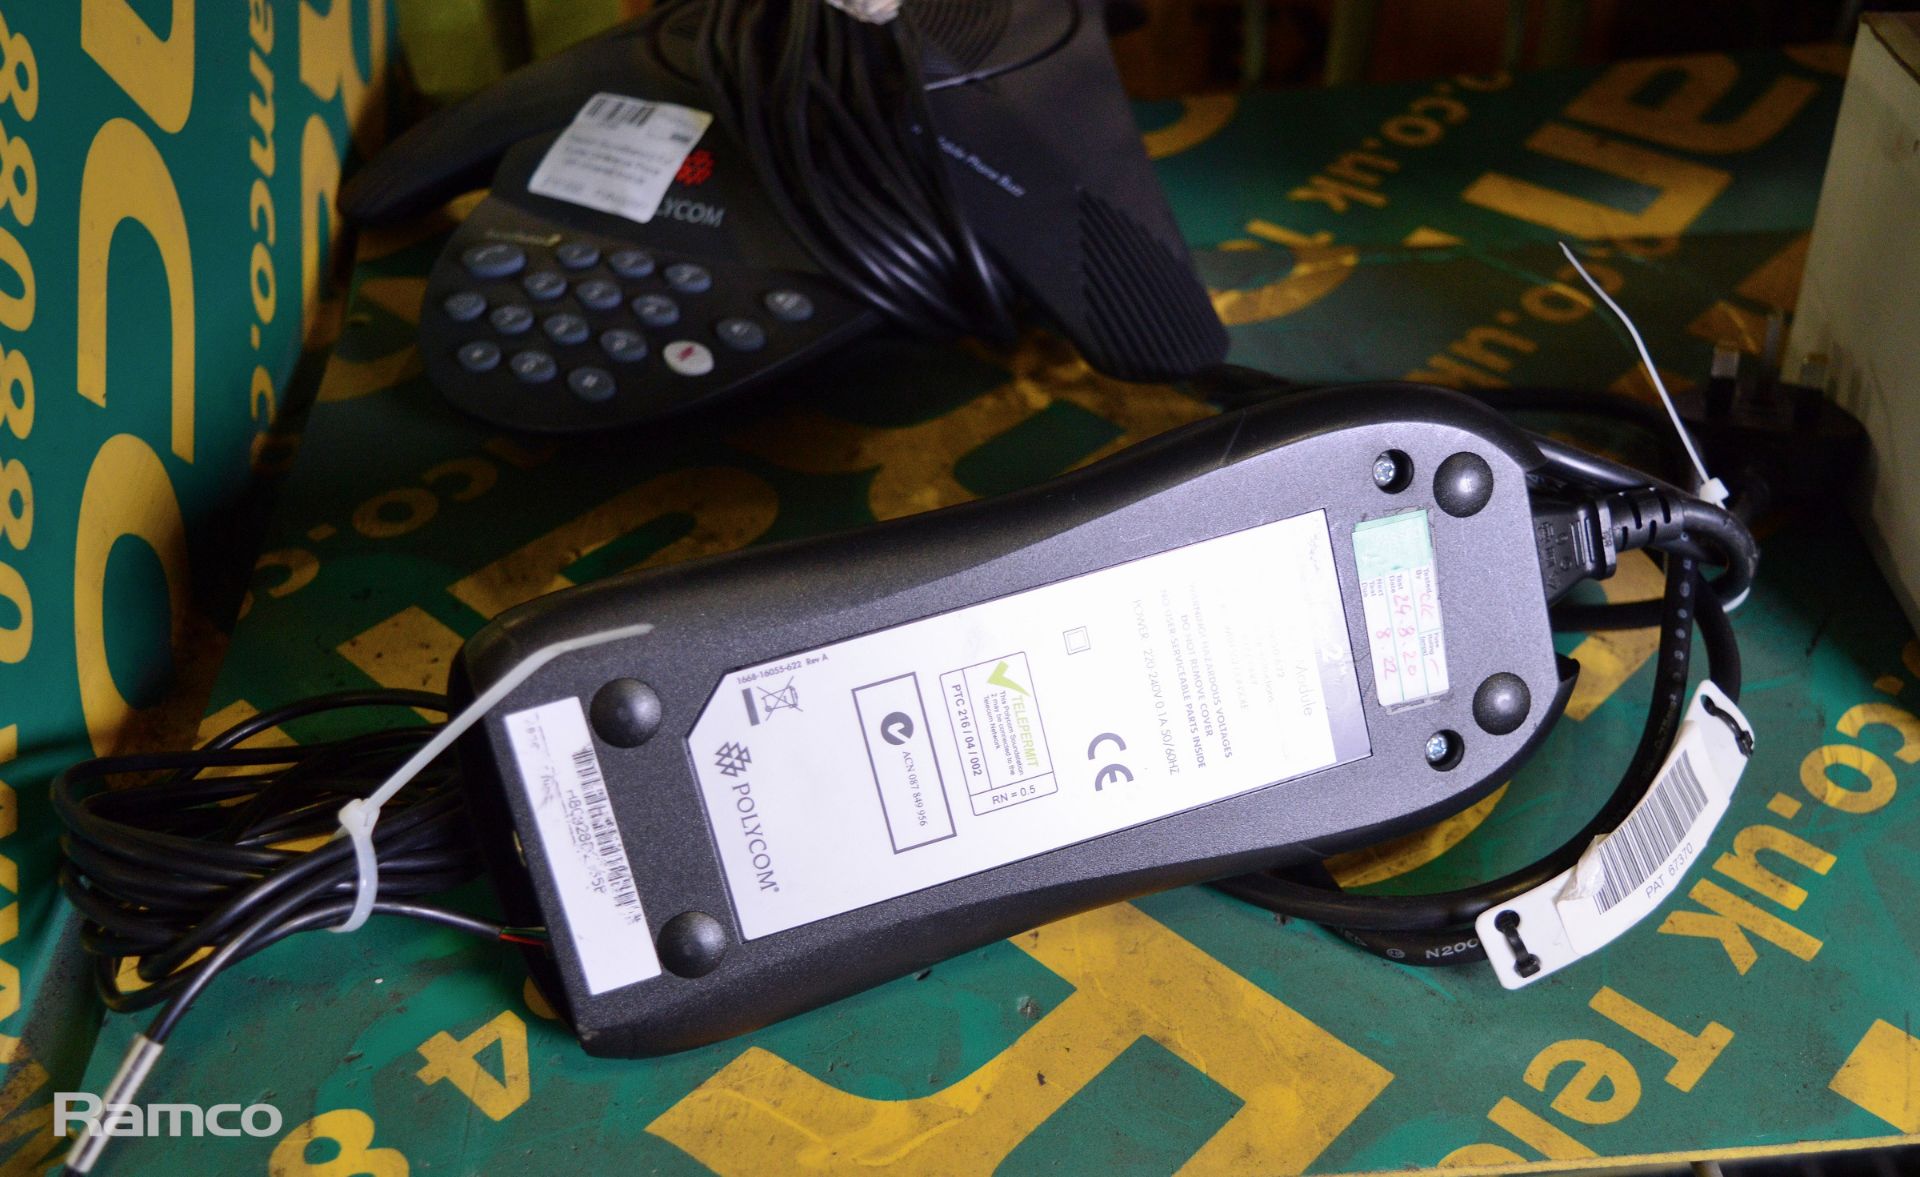 Optoma Projector in Black Textile Carry Bag & 2x Polycom SoundStation2 Full Duplex Conference Phone - Image 3 of 5